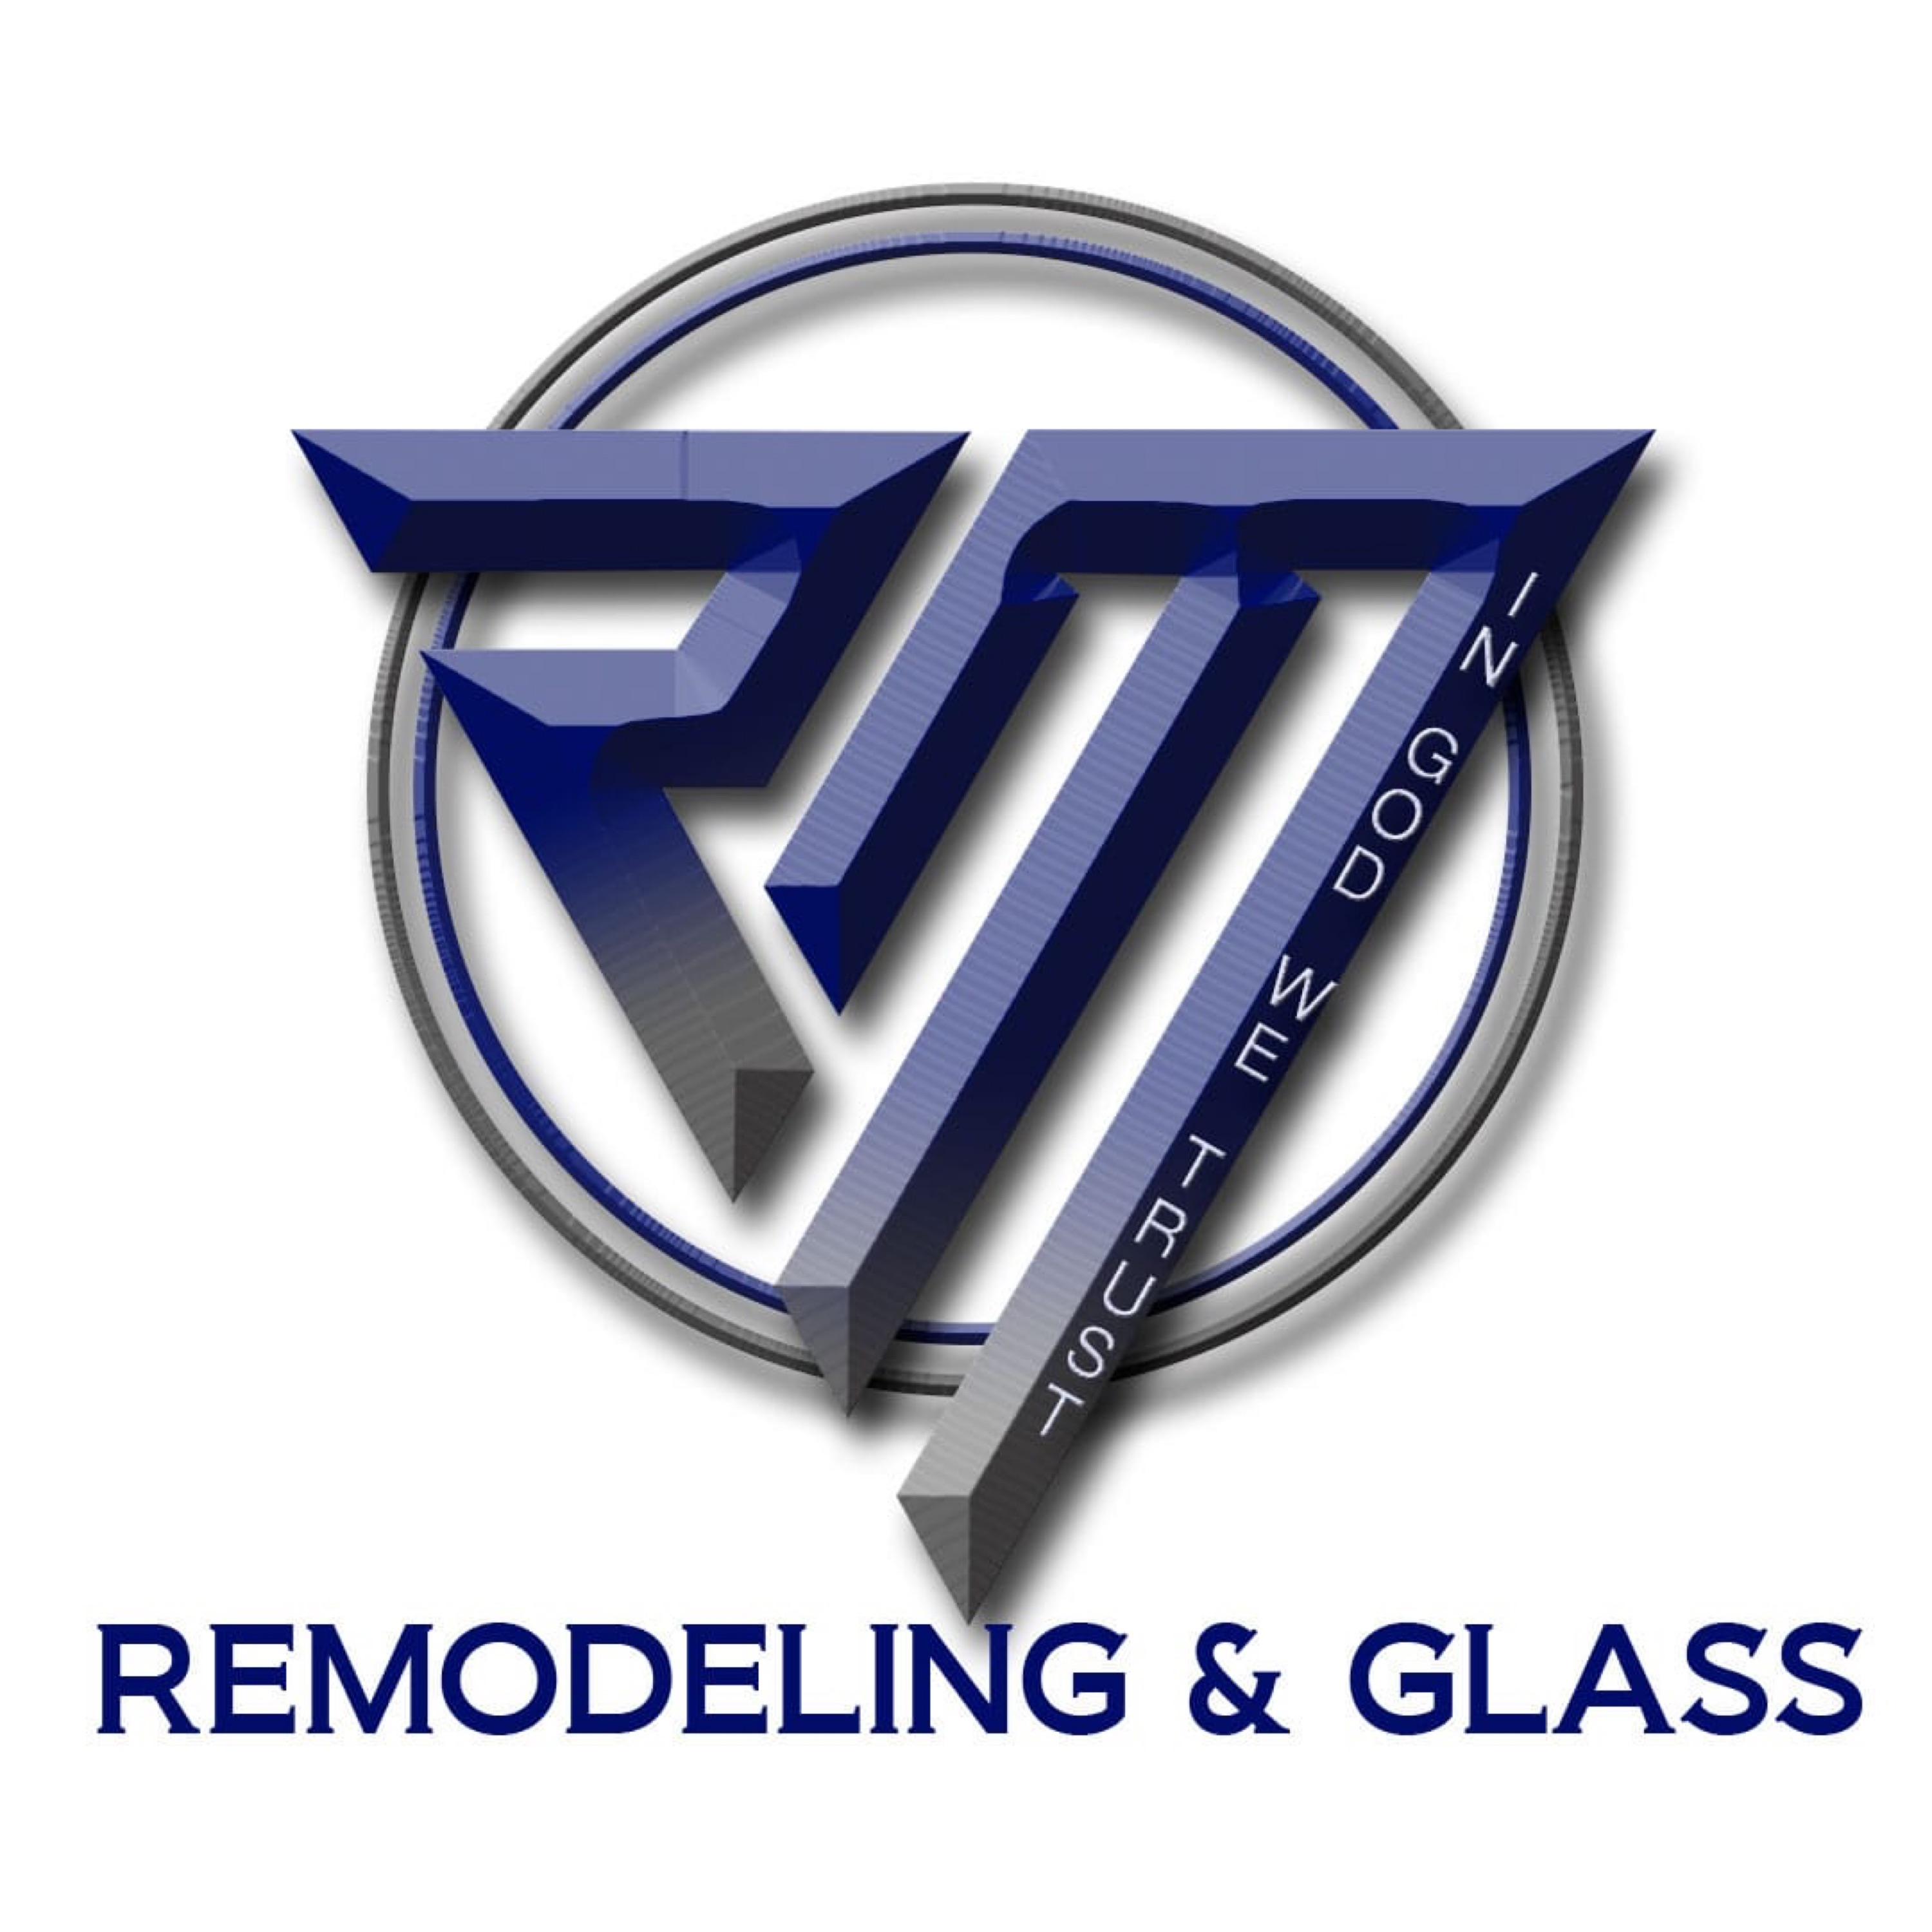 PM REMODELING & GLASS Logo